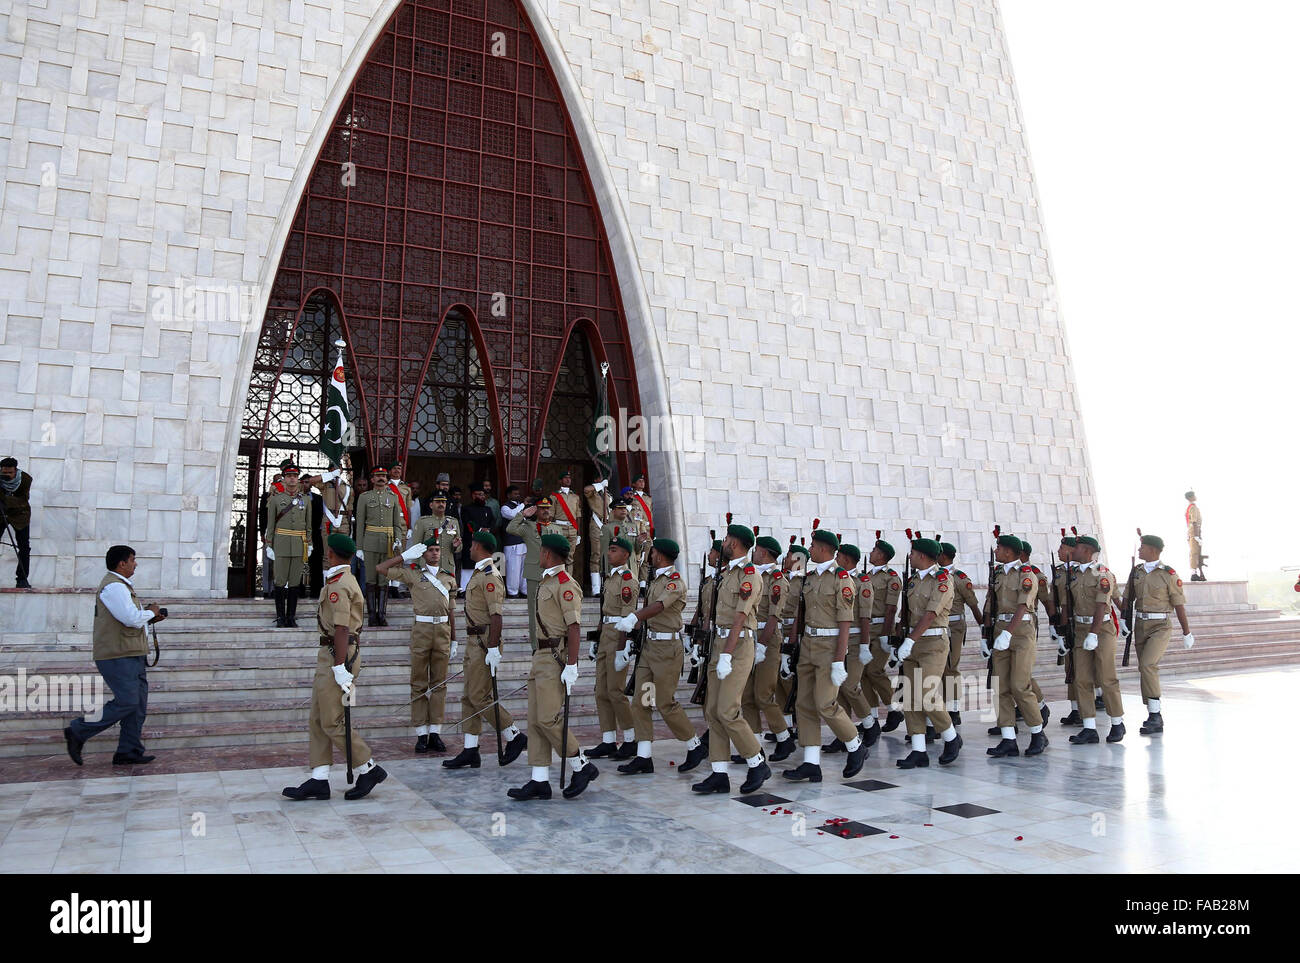 Karachi. 25th Dec, 2015. Pakistan army cadets take part in an event to mark the birth anniversary of Pakistan's founder Mohammad Ali Jinnah in southern Pakistan's Karachi on Dec. 25, 2015. Credit:  Masroor/Xinhua/Alamy Live News Stock Photo